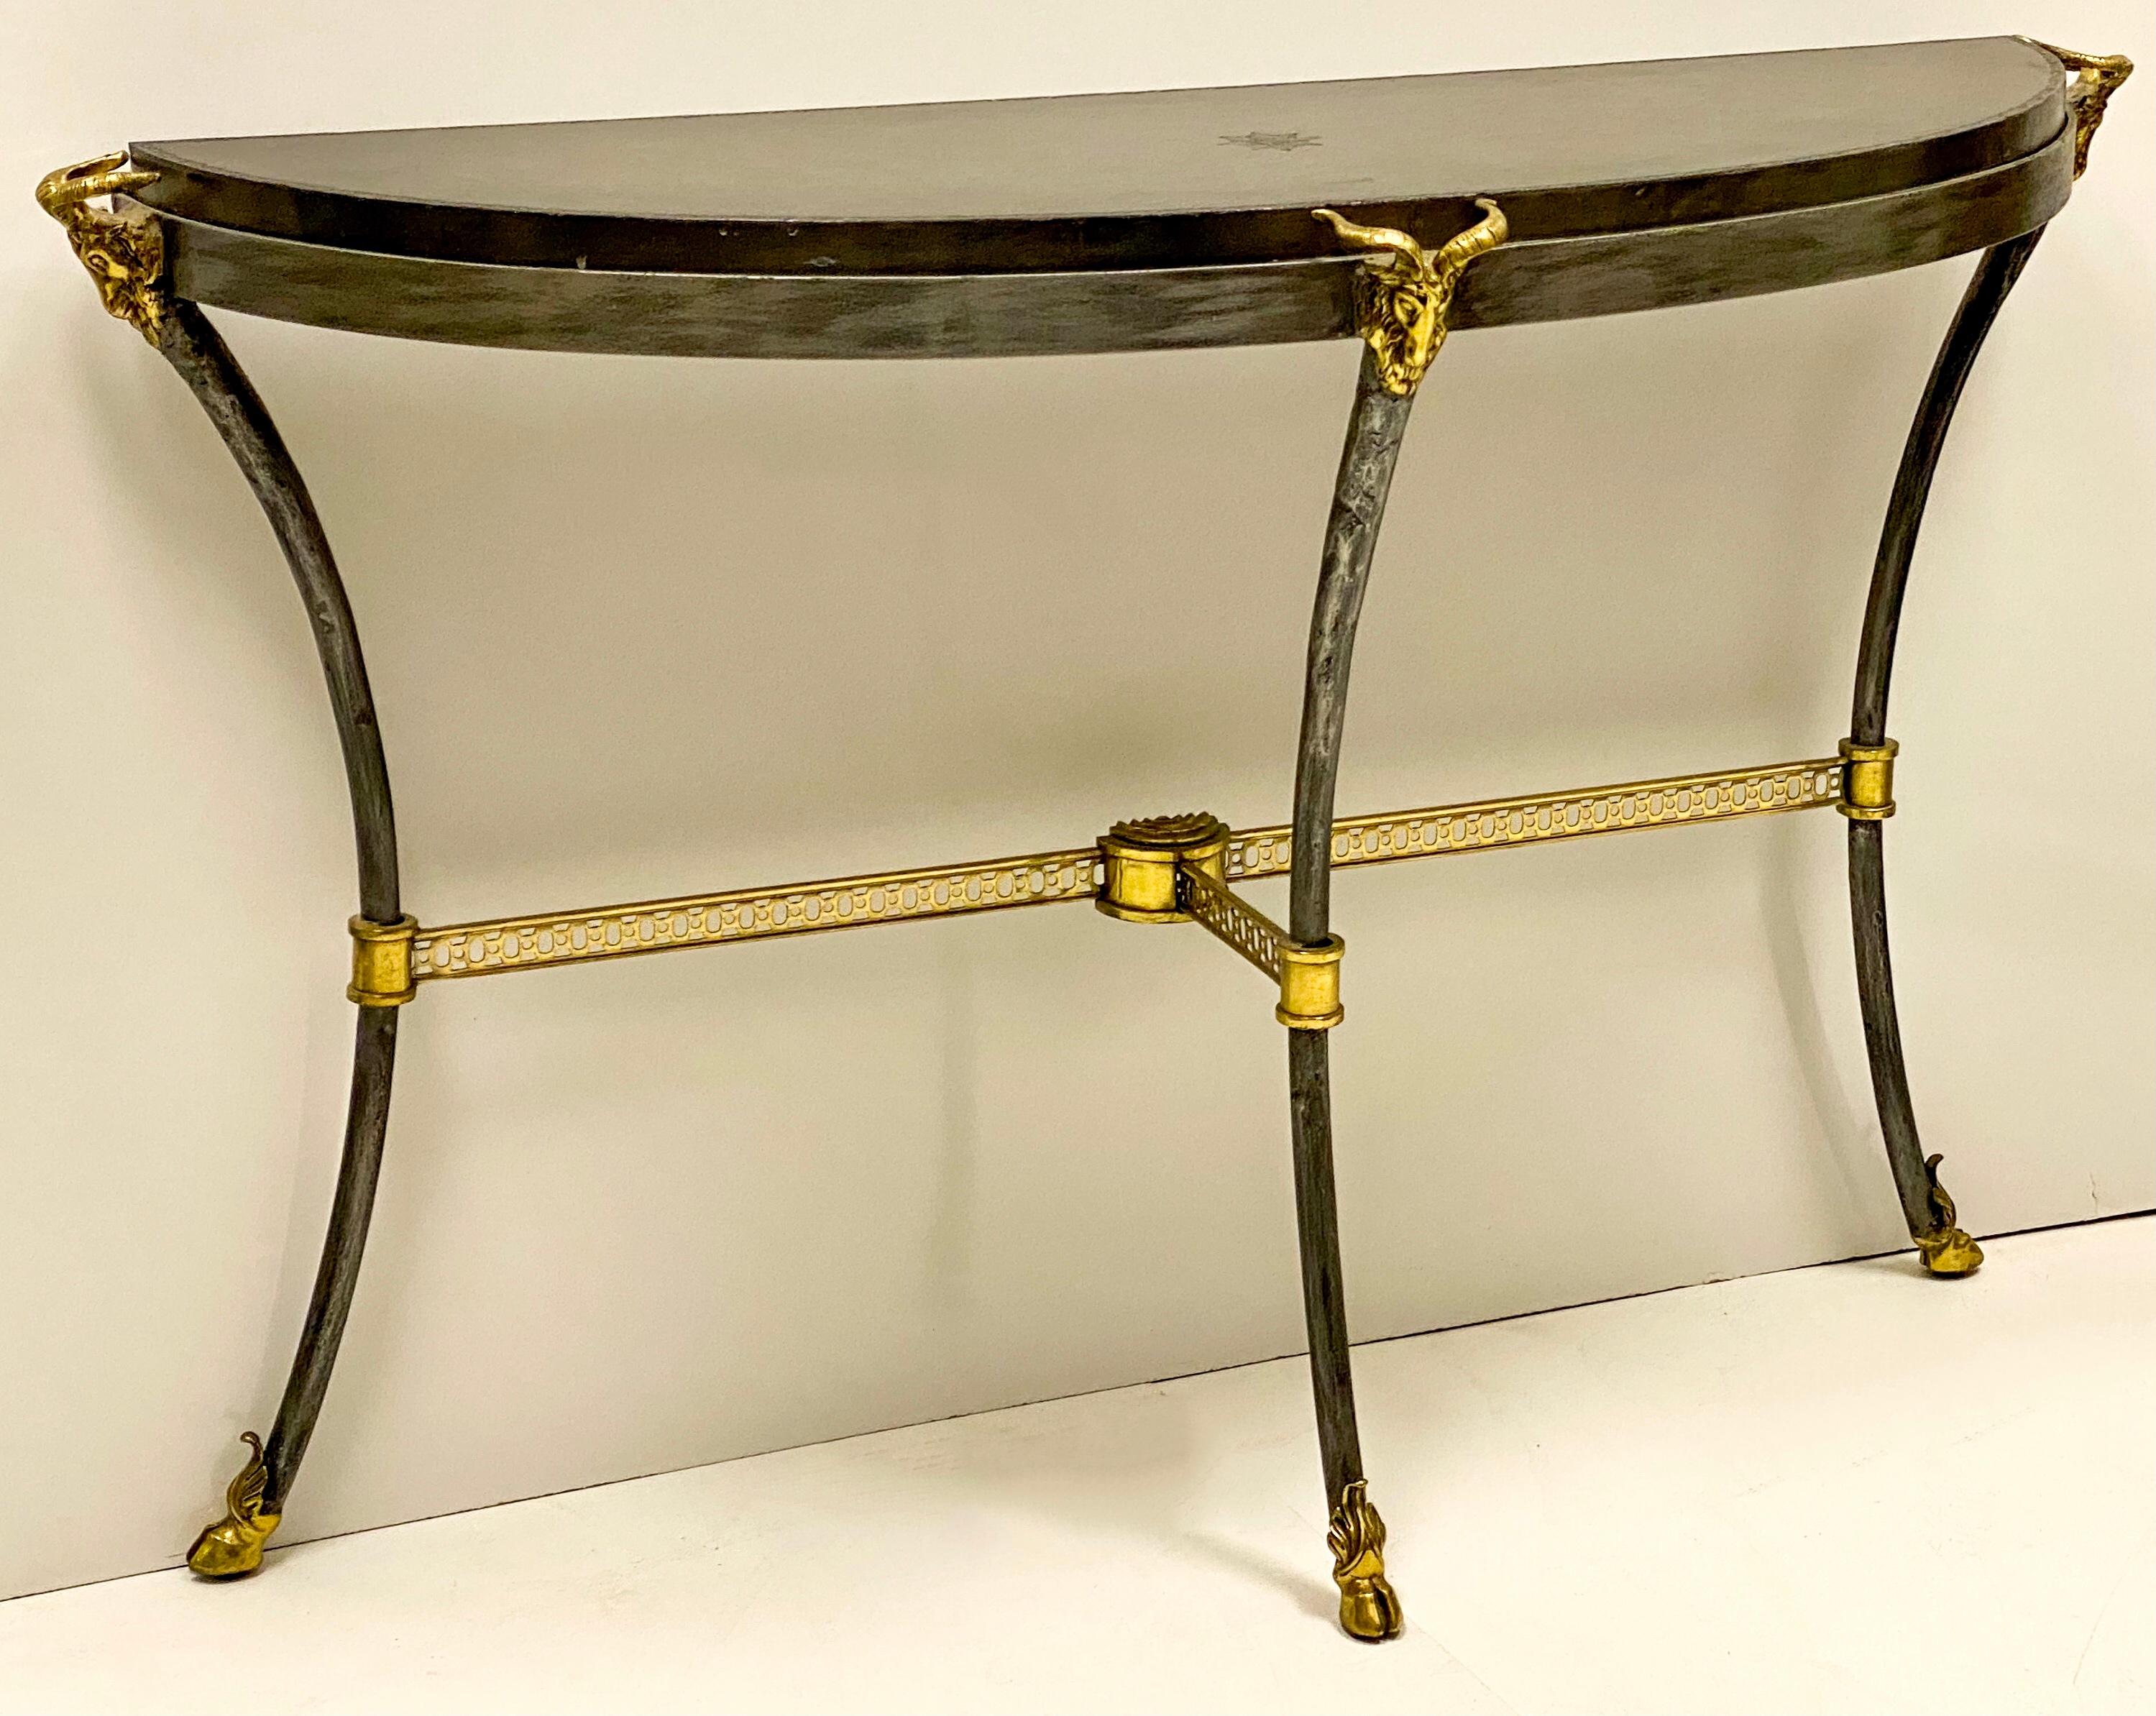 This is a neo-classical style console table by Maitland-Smith. It has an unusual gray tooled leather top. The base is iron with brass ram appointments. It is marked and in very good condition.